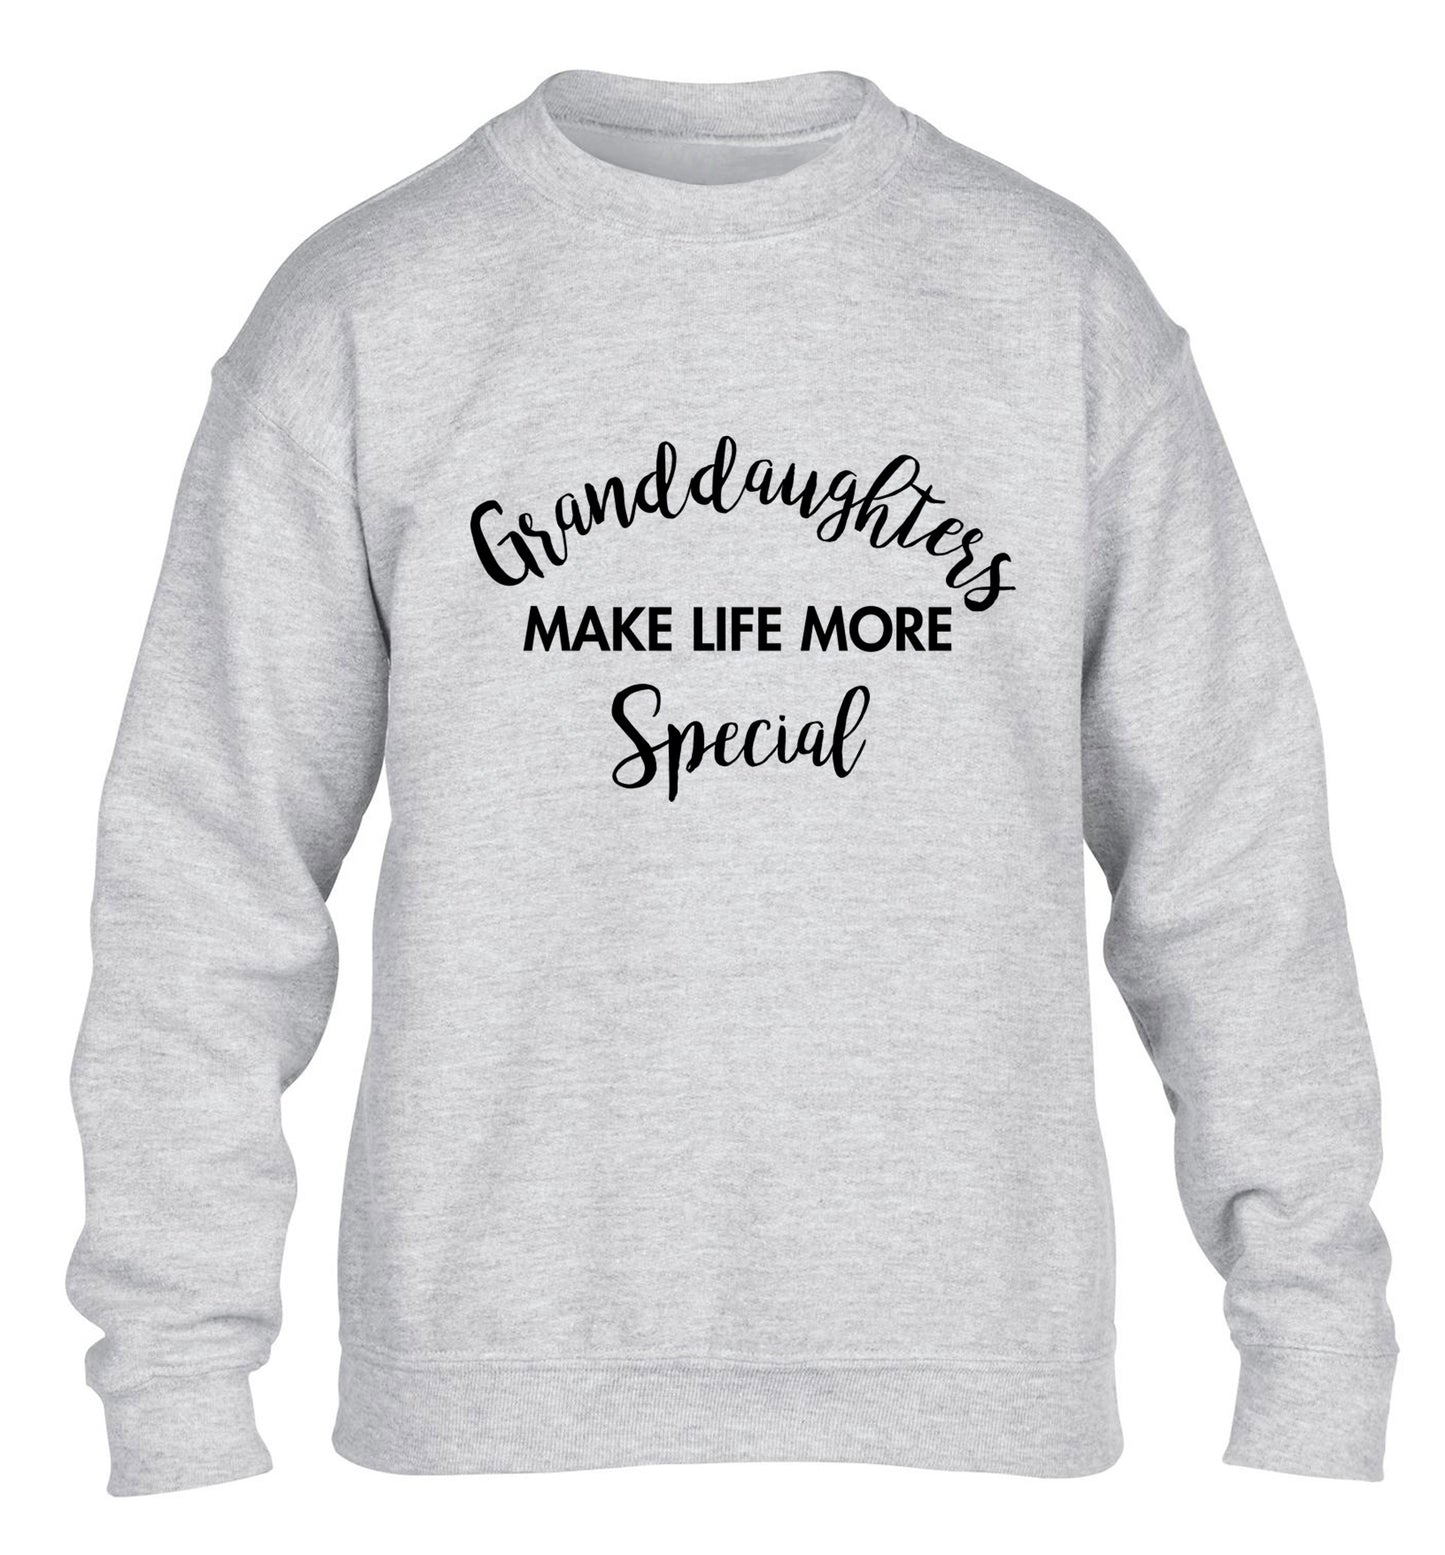 Granddaughters make life more special children's grey sweater 12-14 Years